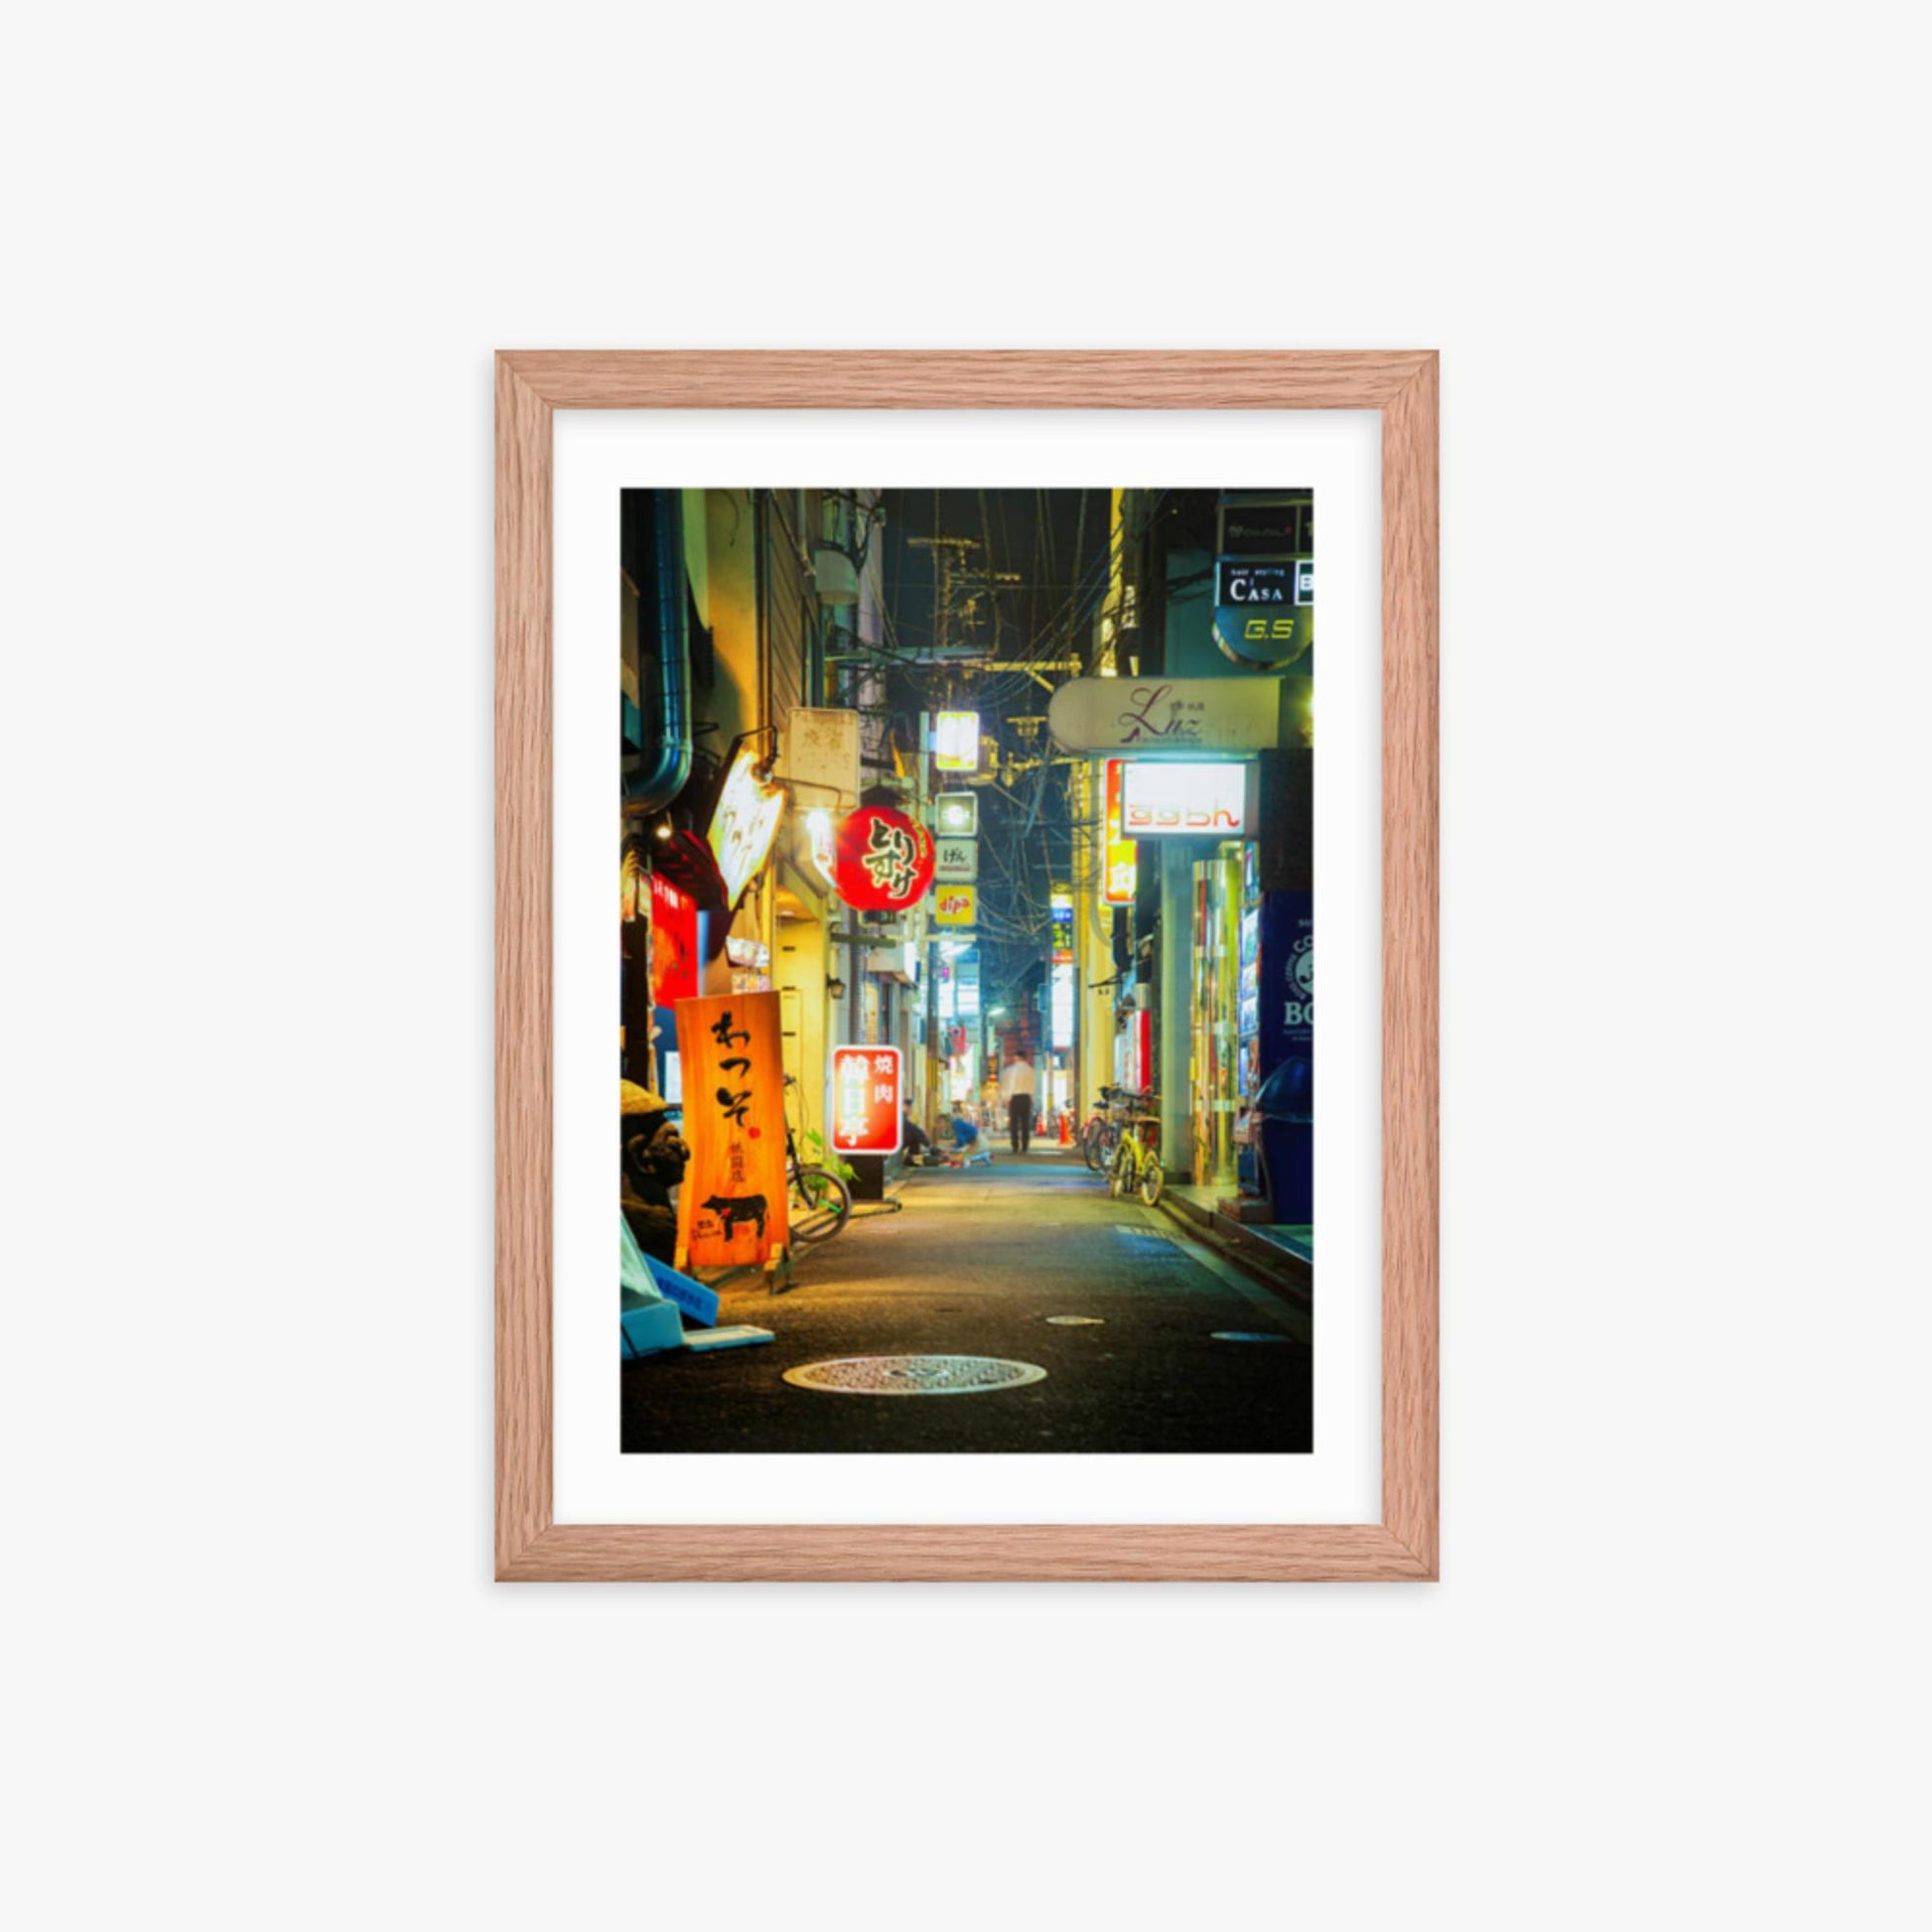 Kyoto, Japan backstreet at night 12x16 in Poster With Oak Frame